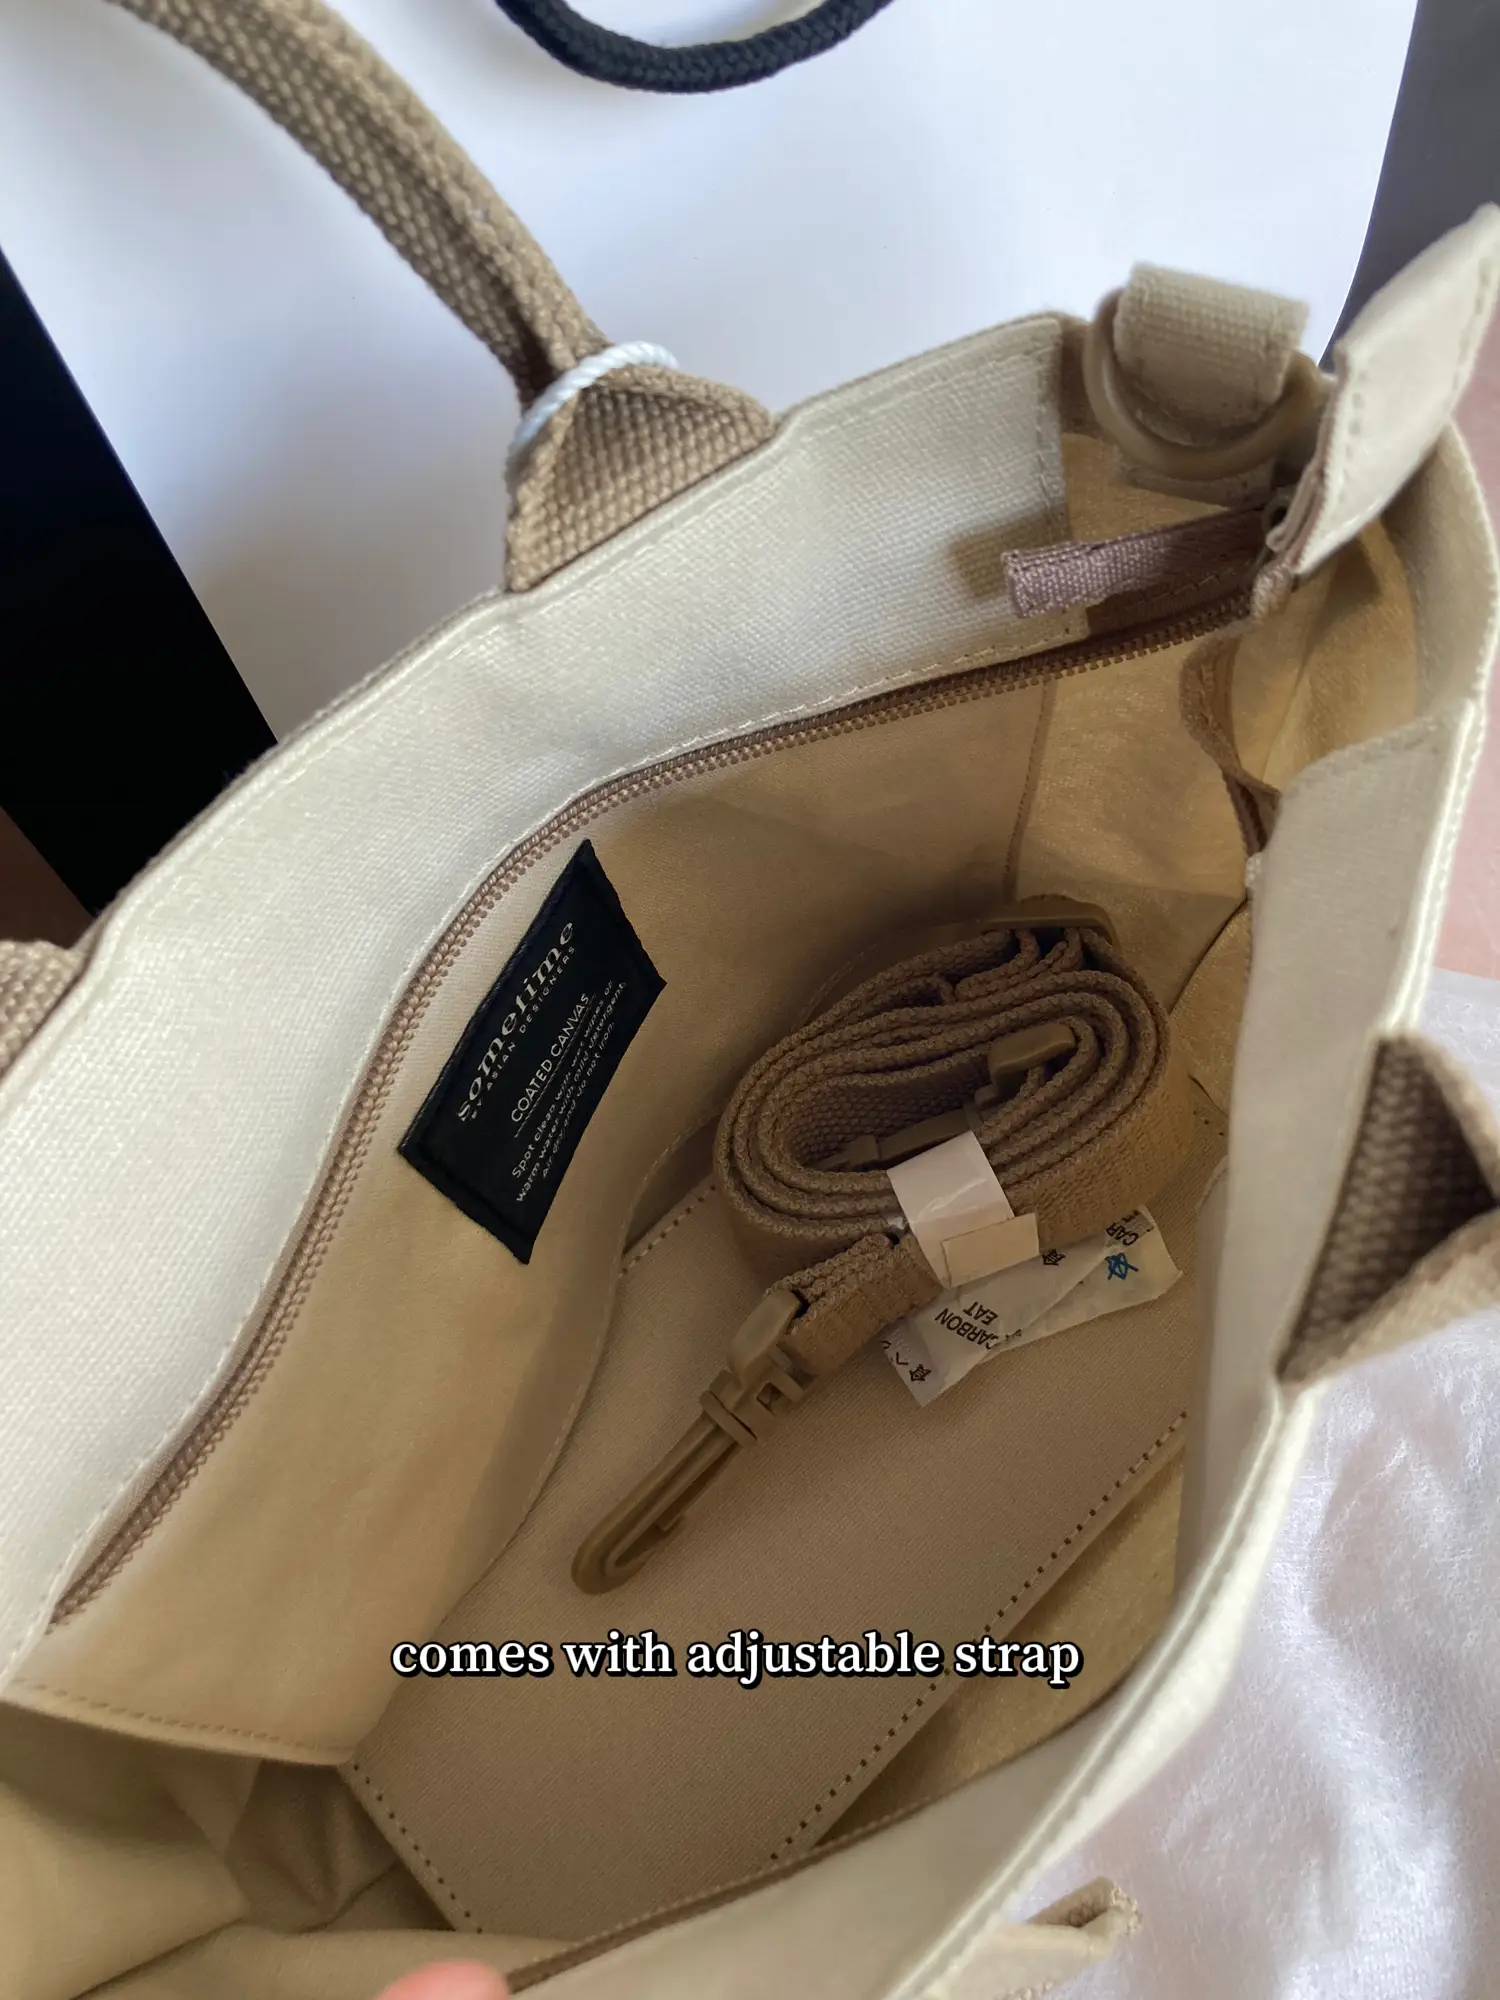 HONEST REVIEW LOCAL BRAND BAG✨🛍🍋, Gallery posted by ourhijabe